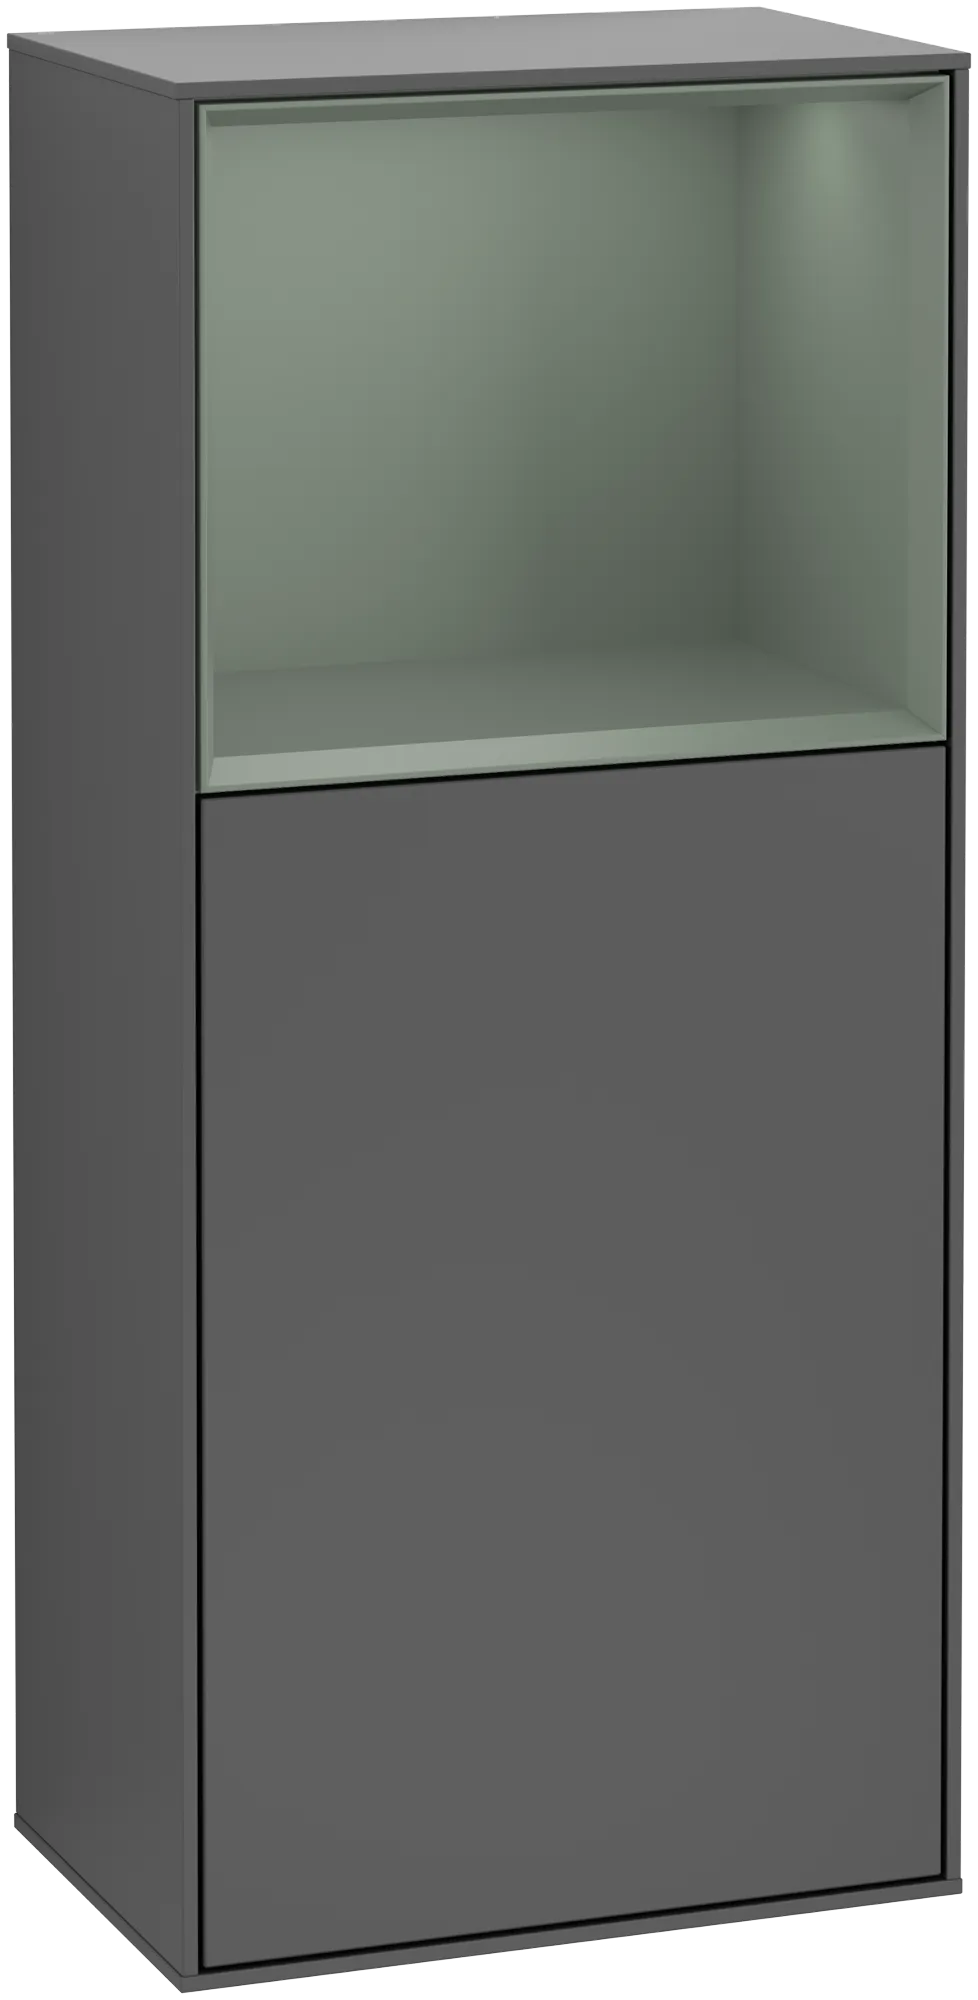 Picture of VILLEROY BOCH Finion Side cabinet, with lighting, 1 door, 418 x 936 x 270 mm, Anthracite Matt Lacquer / Olive Matt Lacquer #G510GMGK